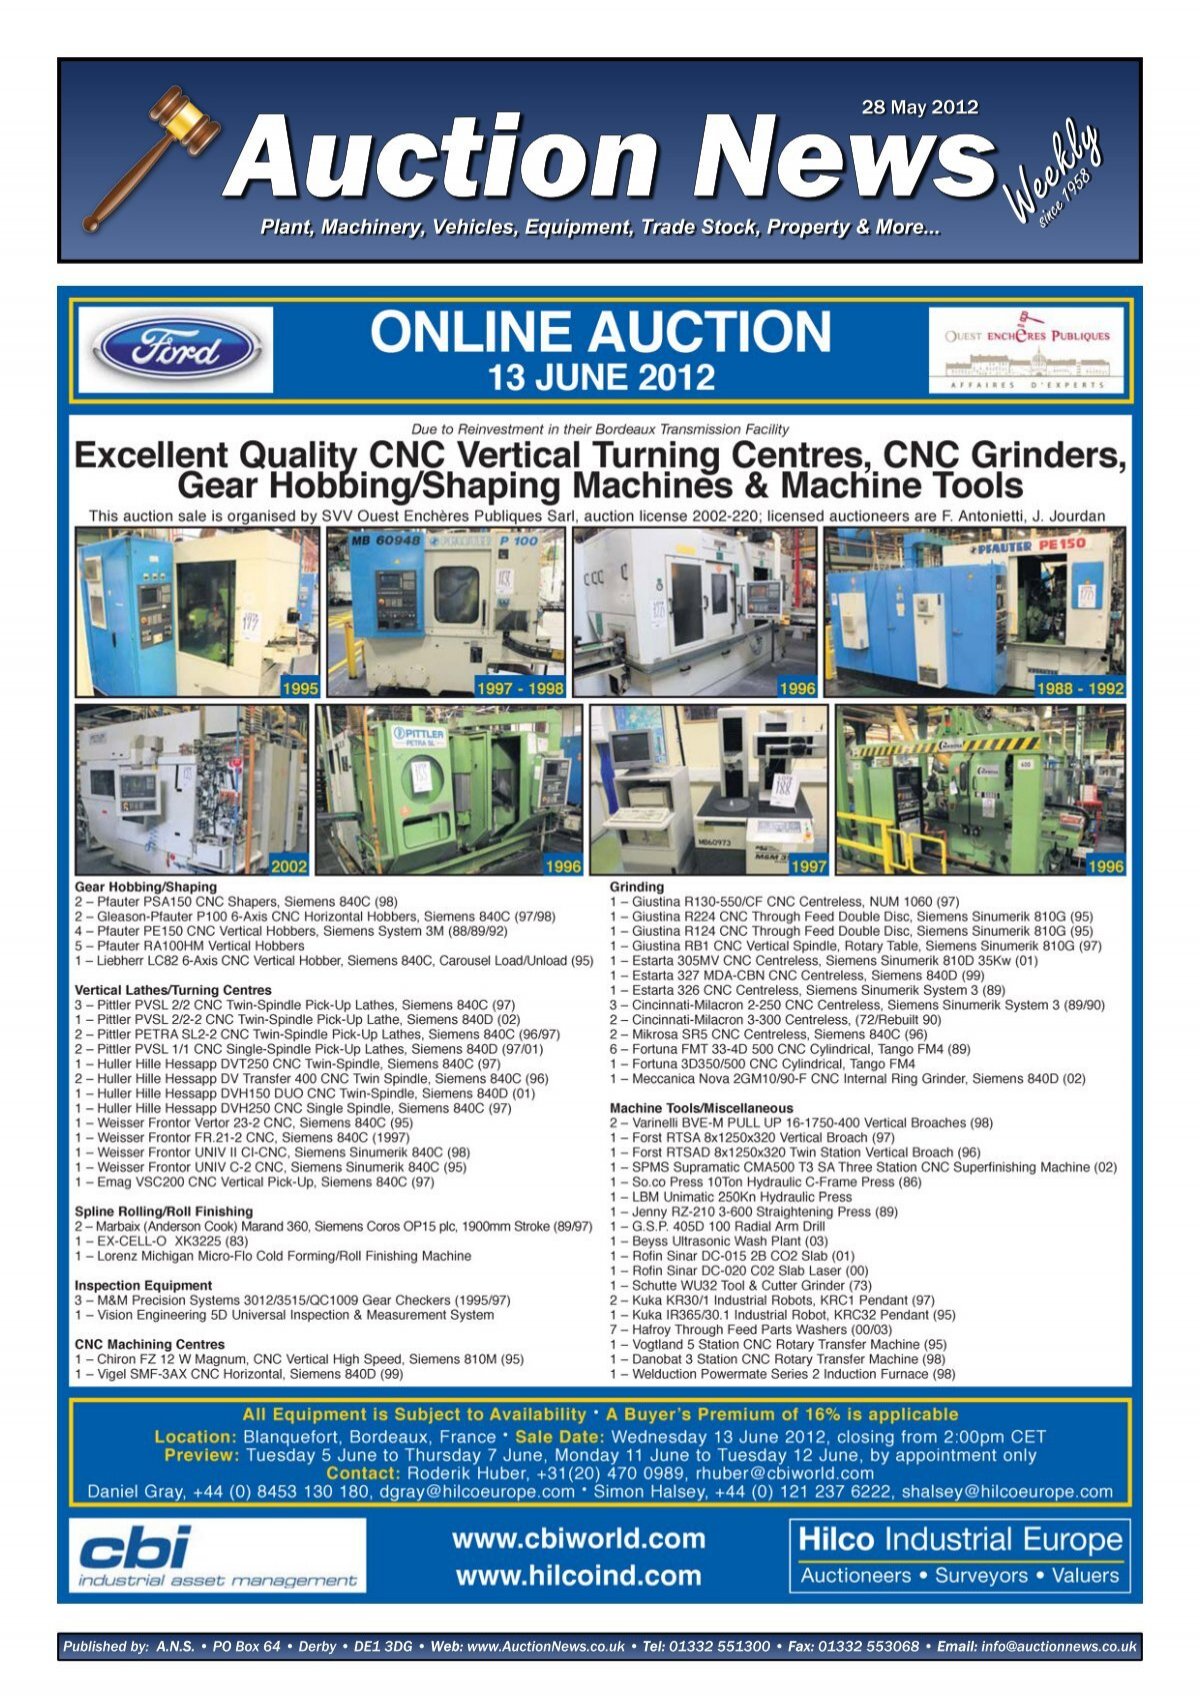 Auction News May 28 12 - Auction News Services